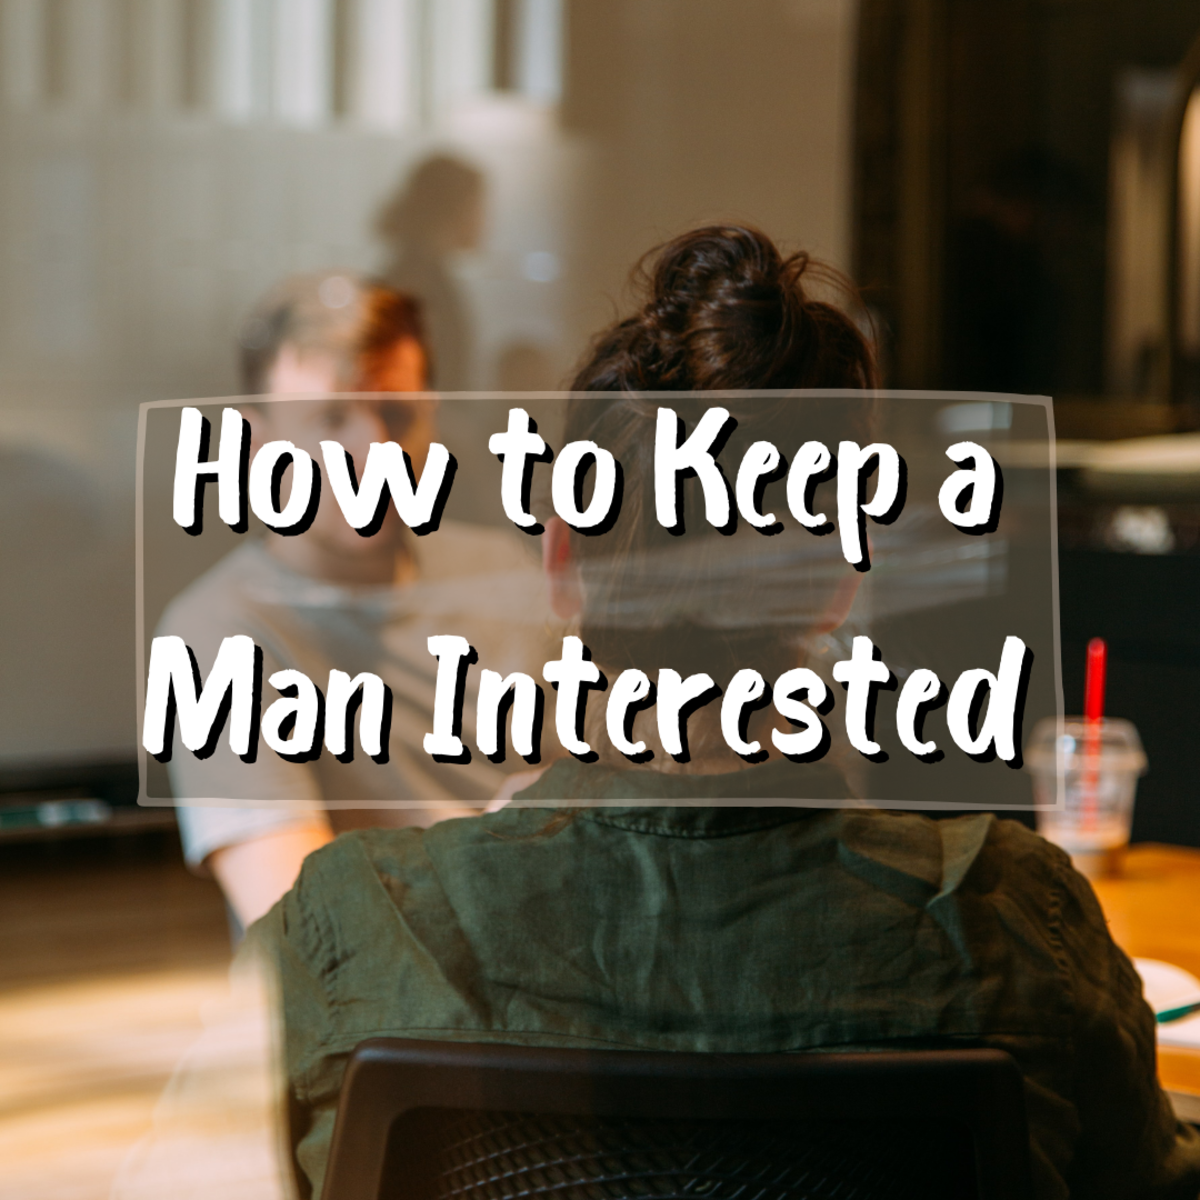 Read on to find 6 valuable ways to keep the man in your life interested in you without resorting to sexual favors.